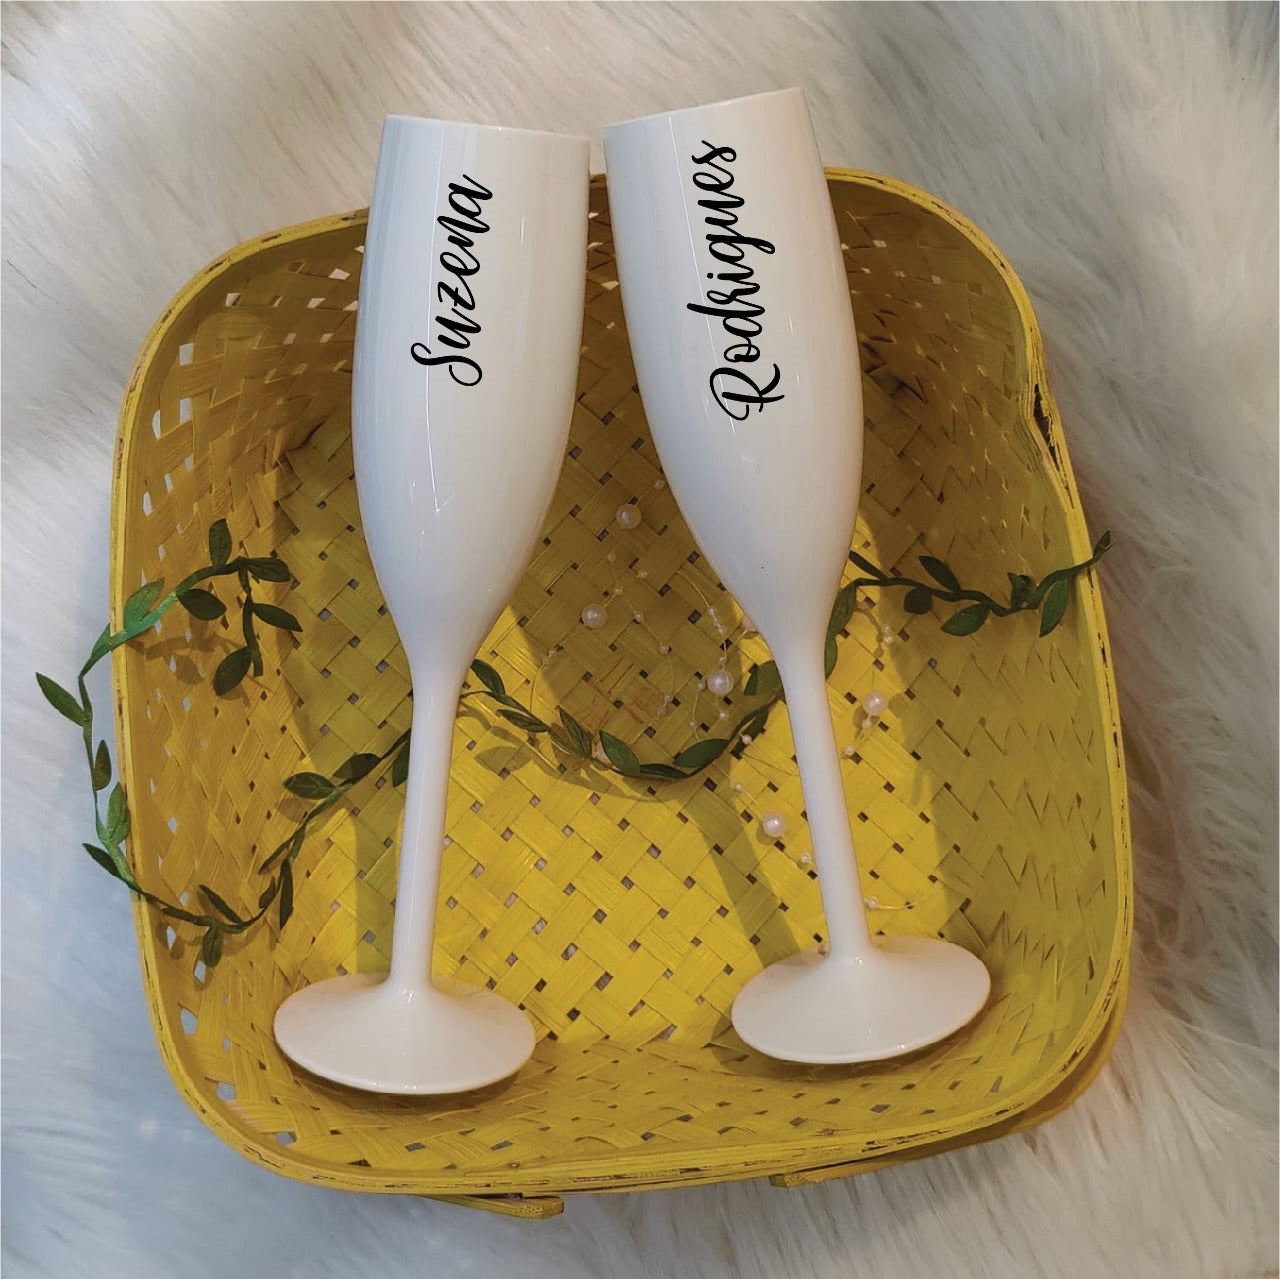 Unbreakable Champagne Flutes with Customisable Name - Set of 2 Ivory white